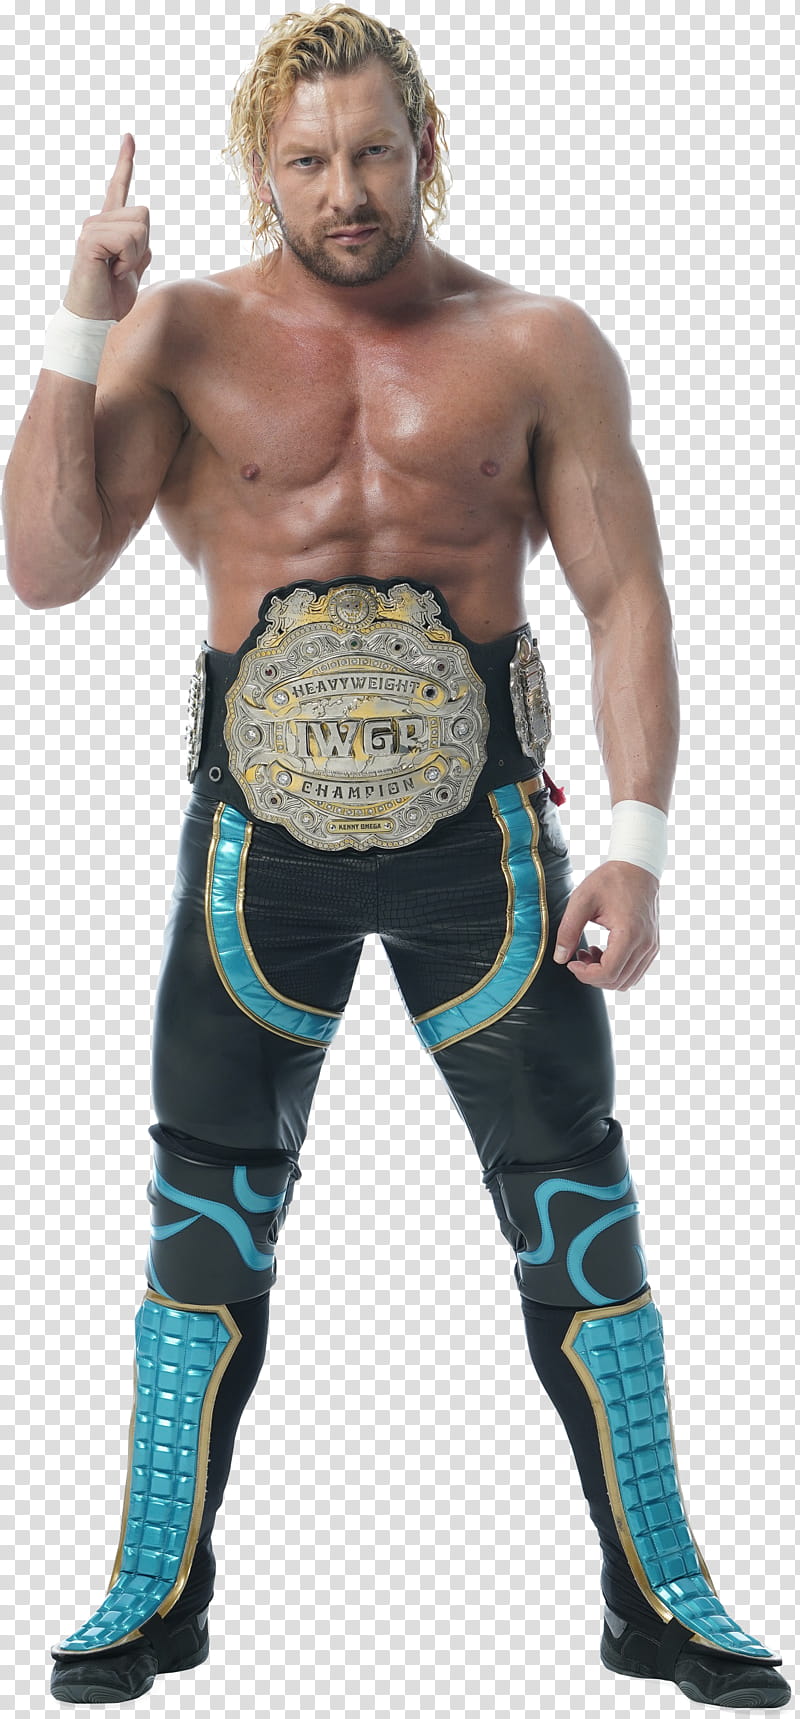 Kenny Omega IWGP Heavyweight Champion transparent background PNG clipart